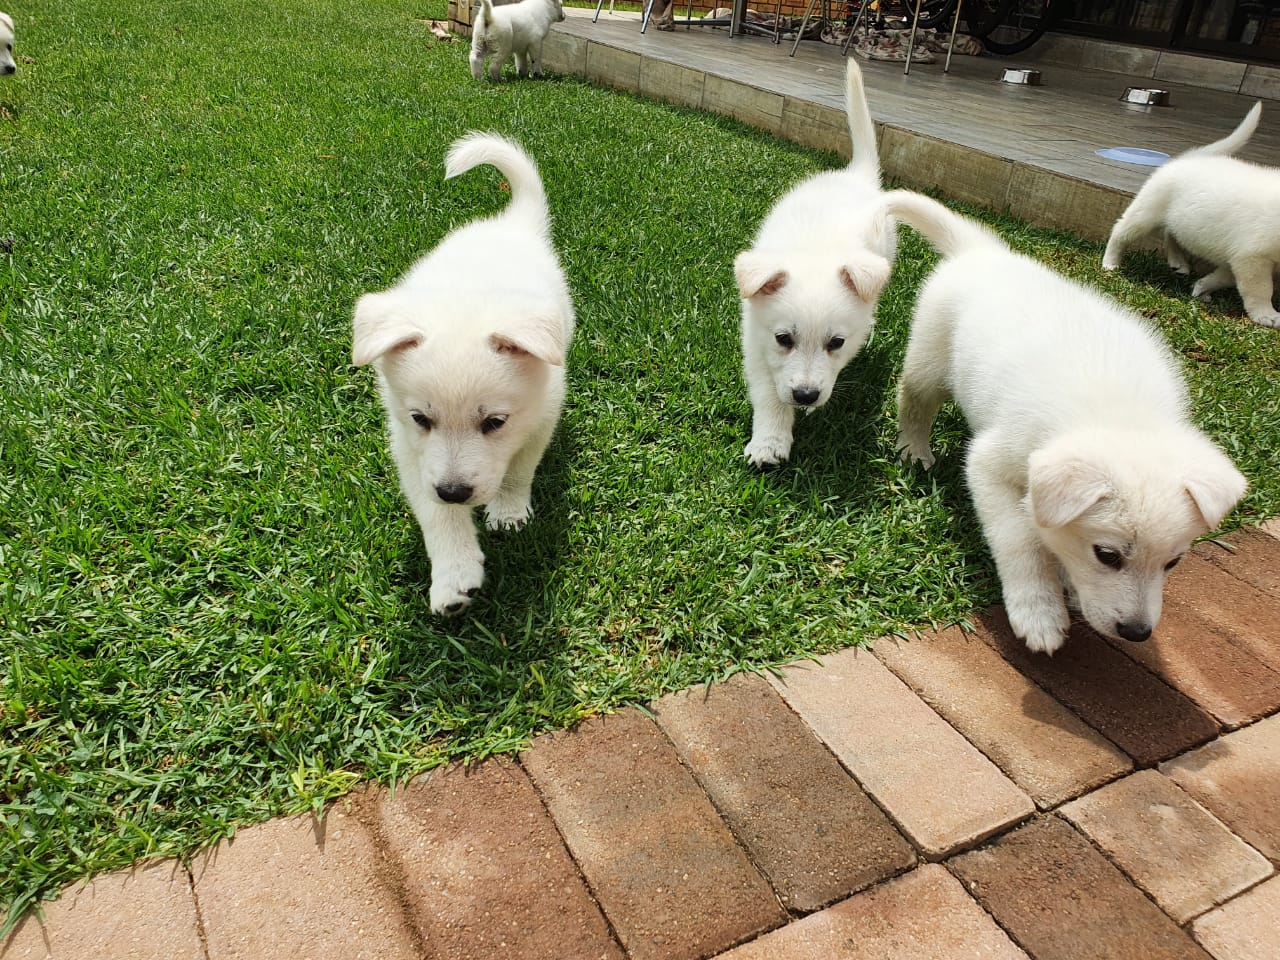 Other Puppies in Johannesburg (27/02/2020)